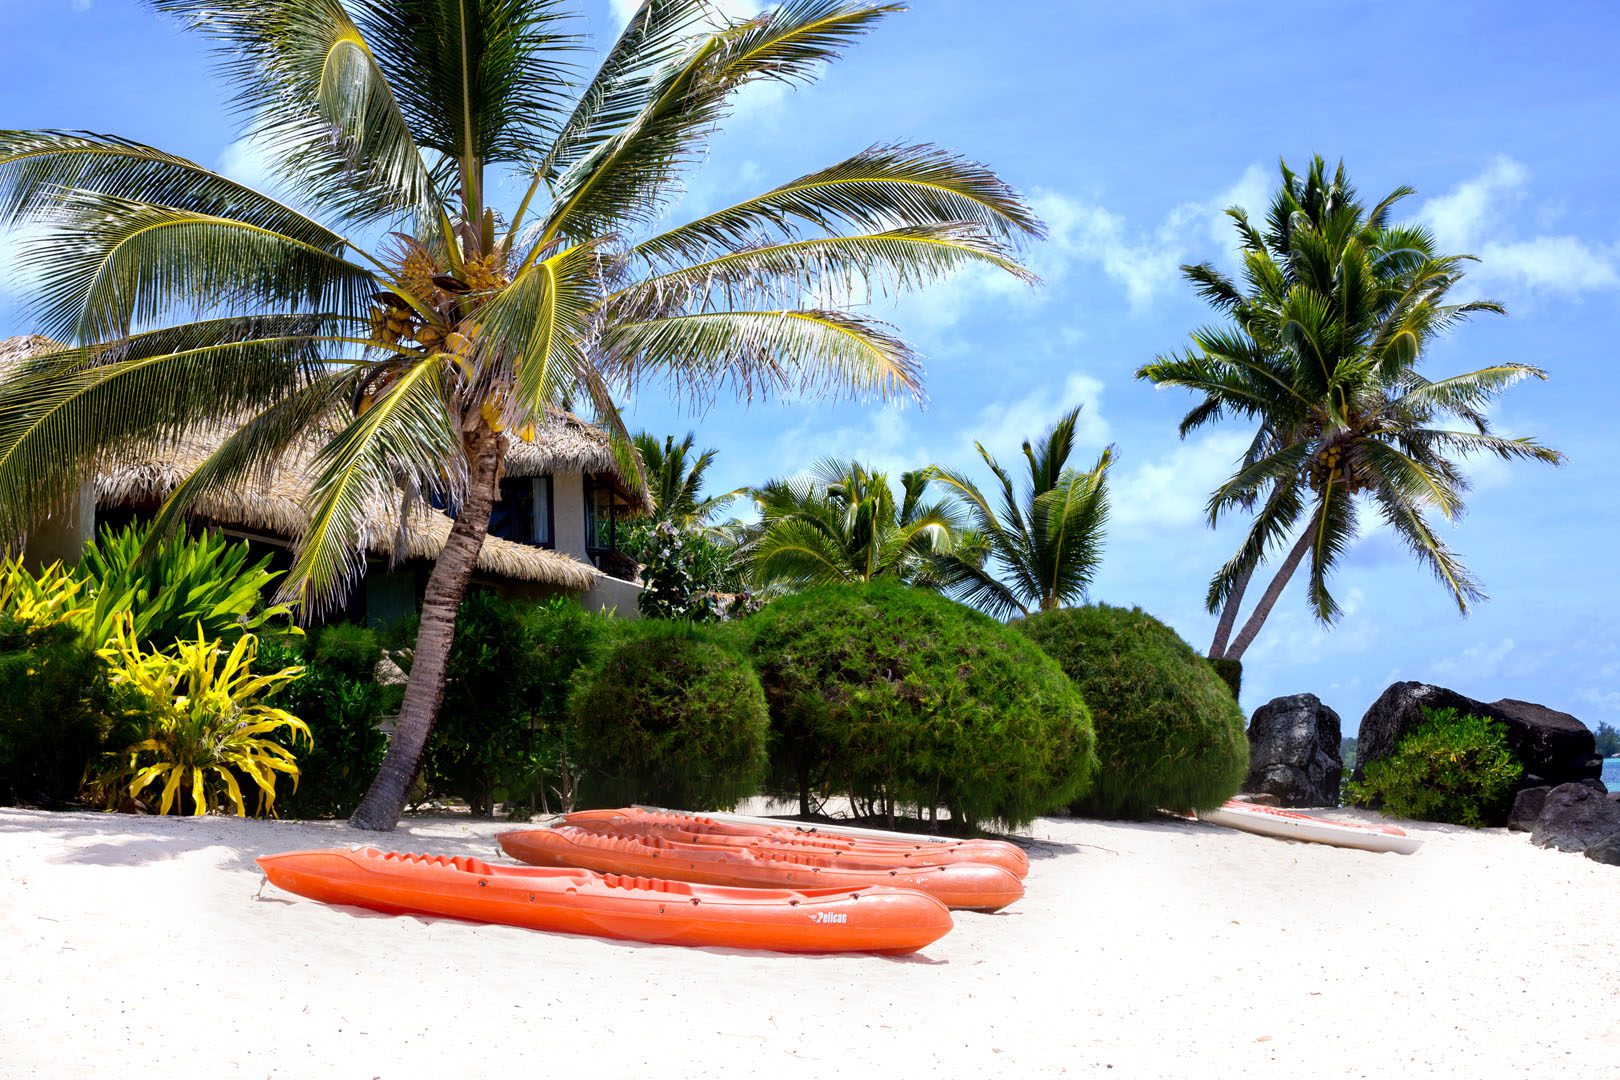 view of te manava villas from the white sandy beach with Kayaks lined up along the beach ready for guests